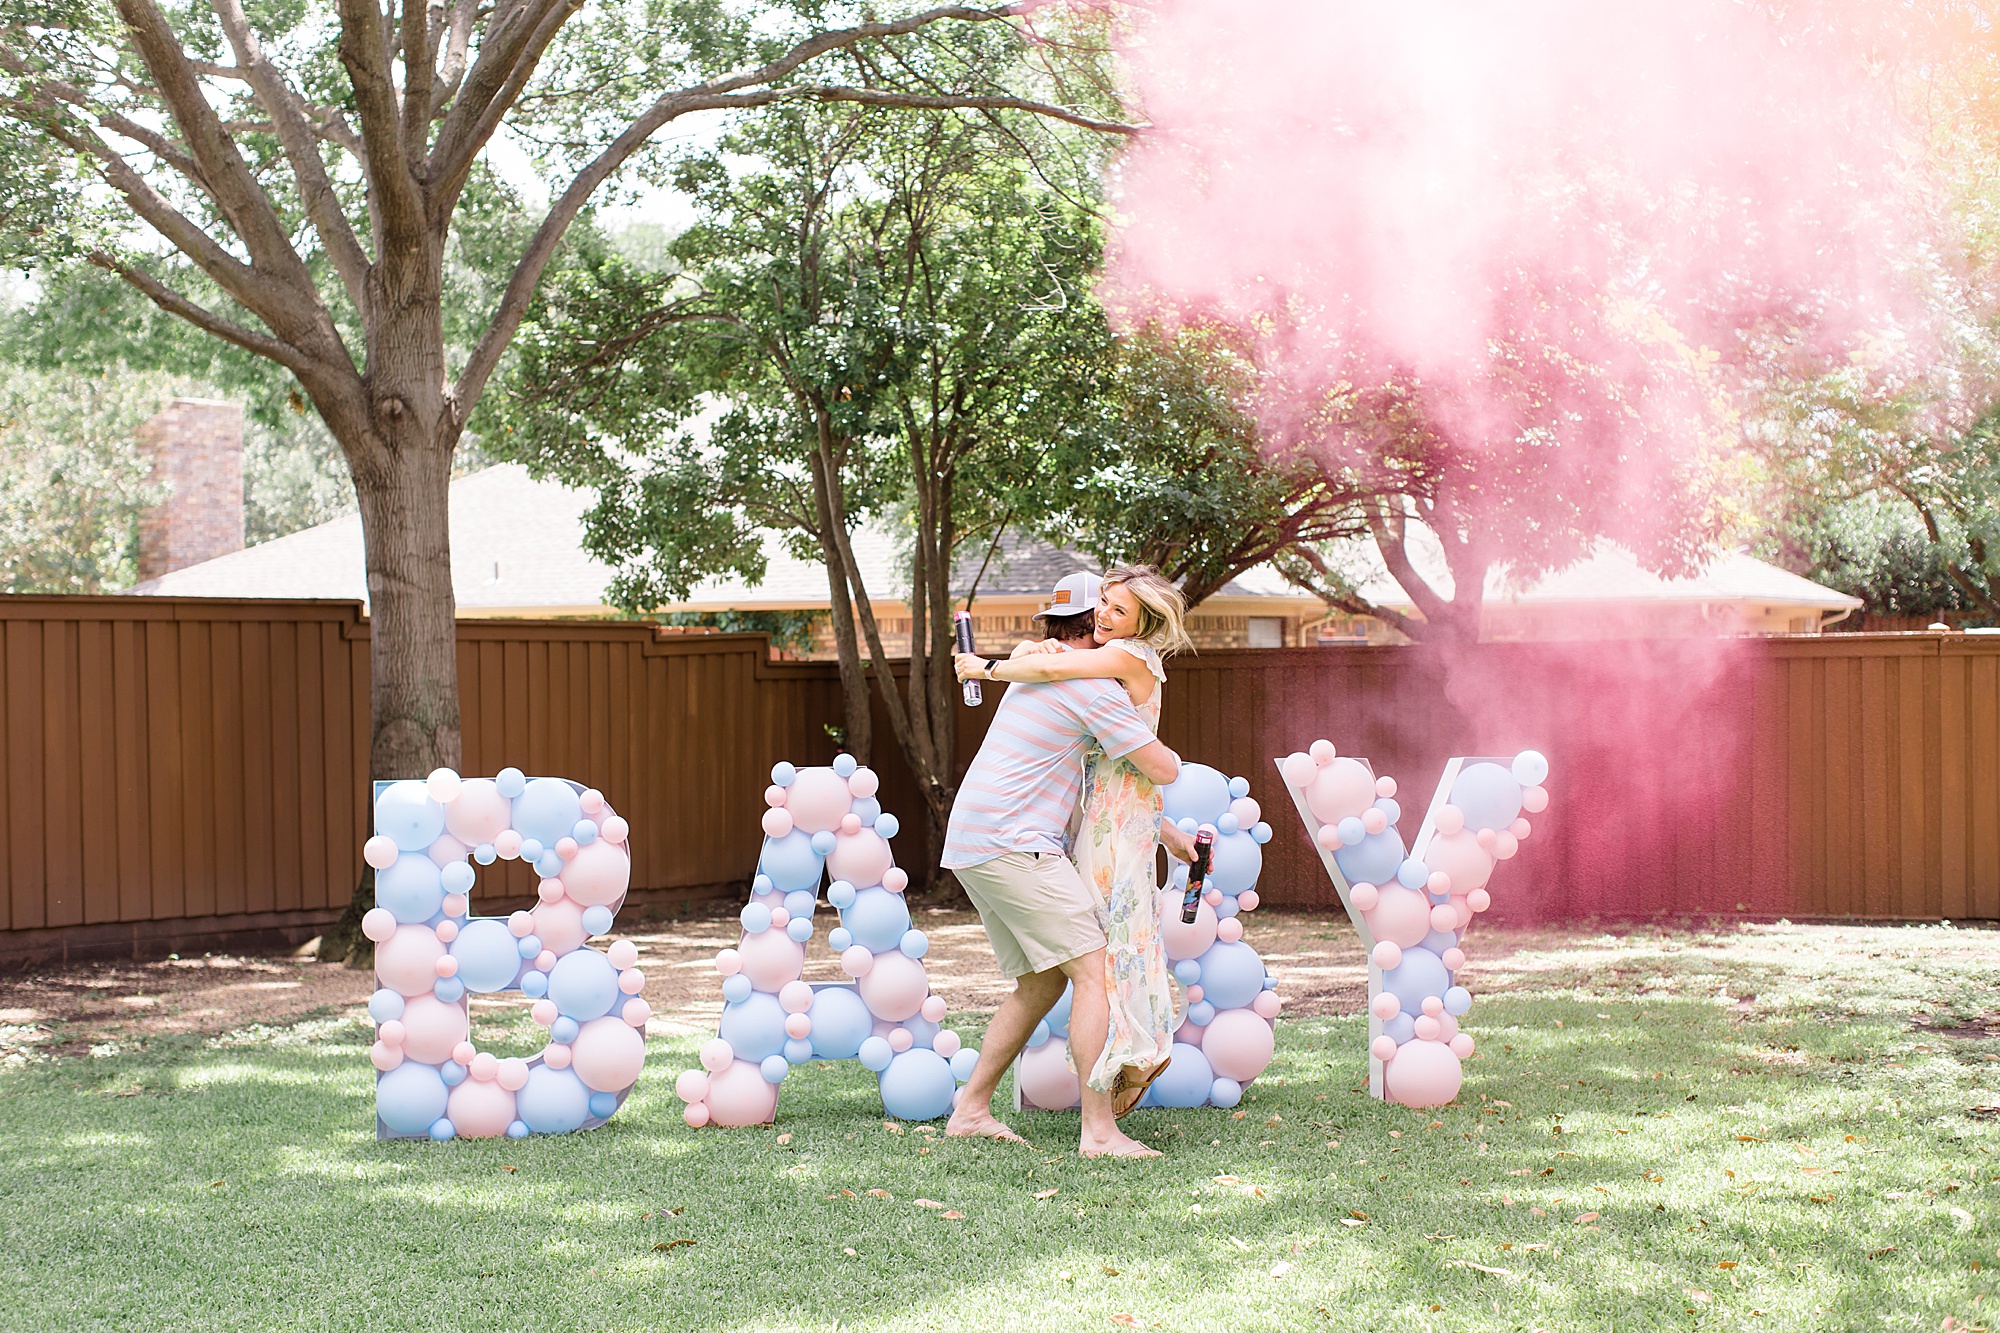 dad picks up mom-to-be during gender reveal